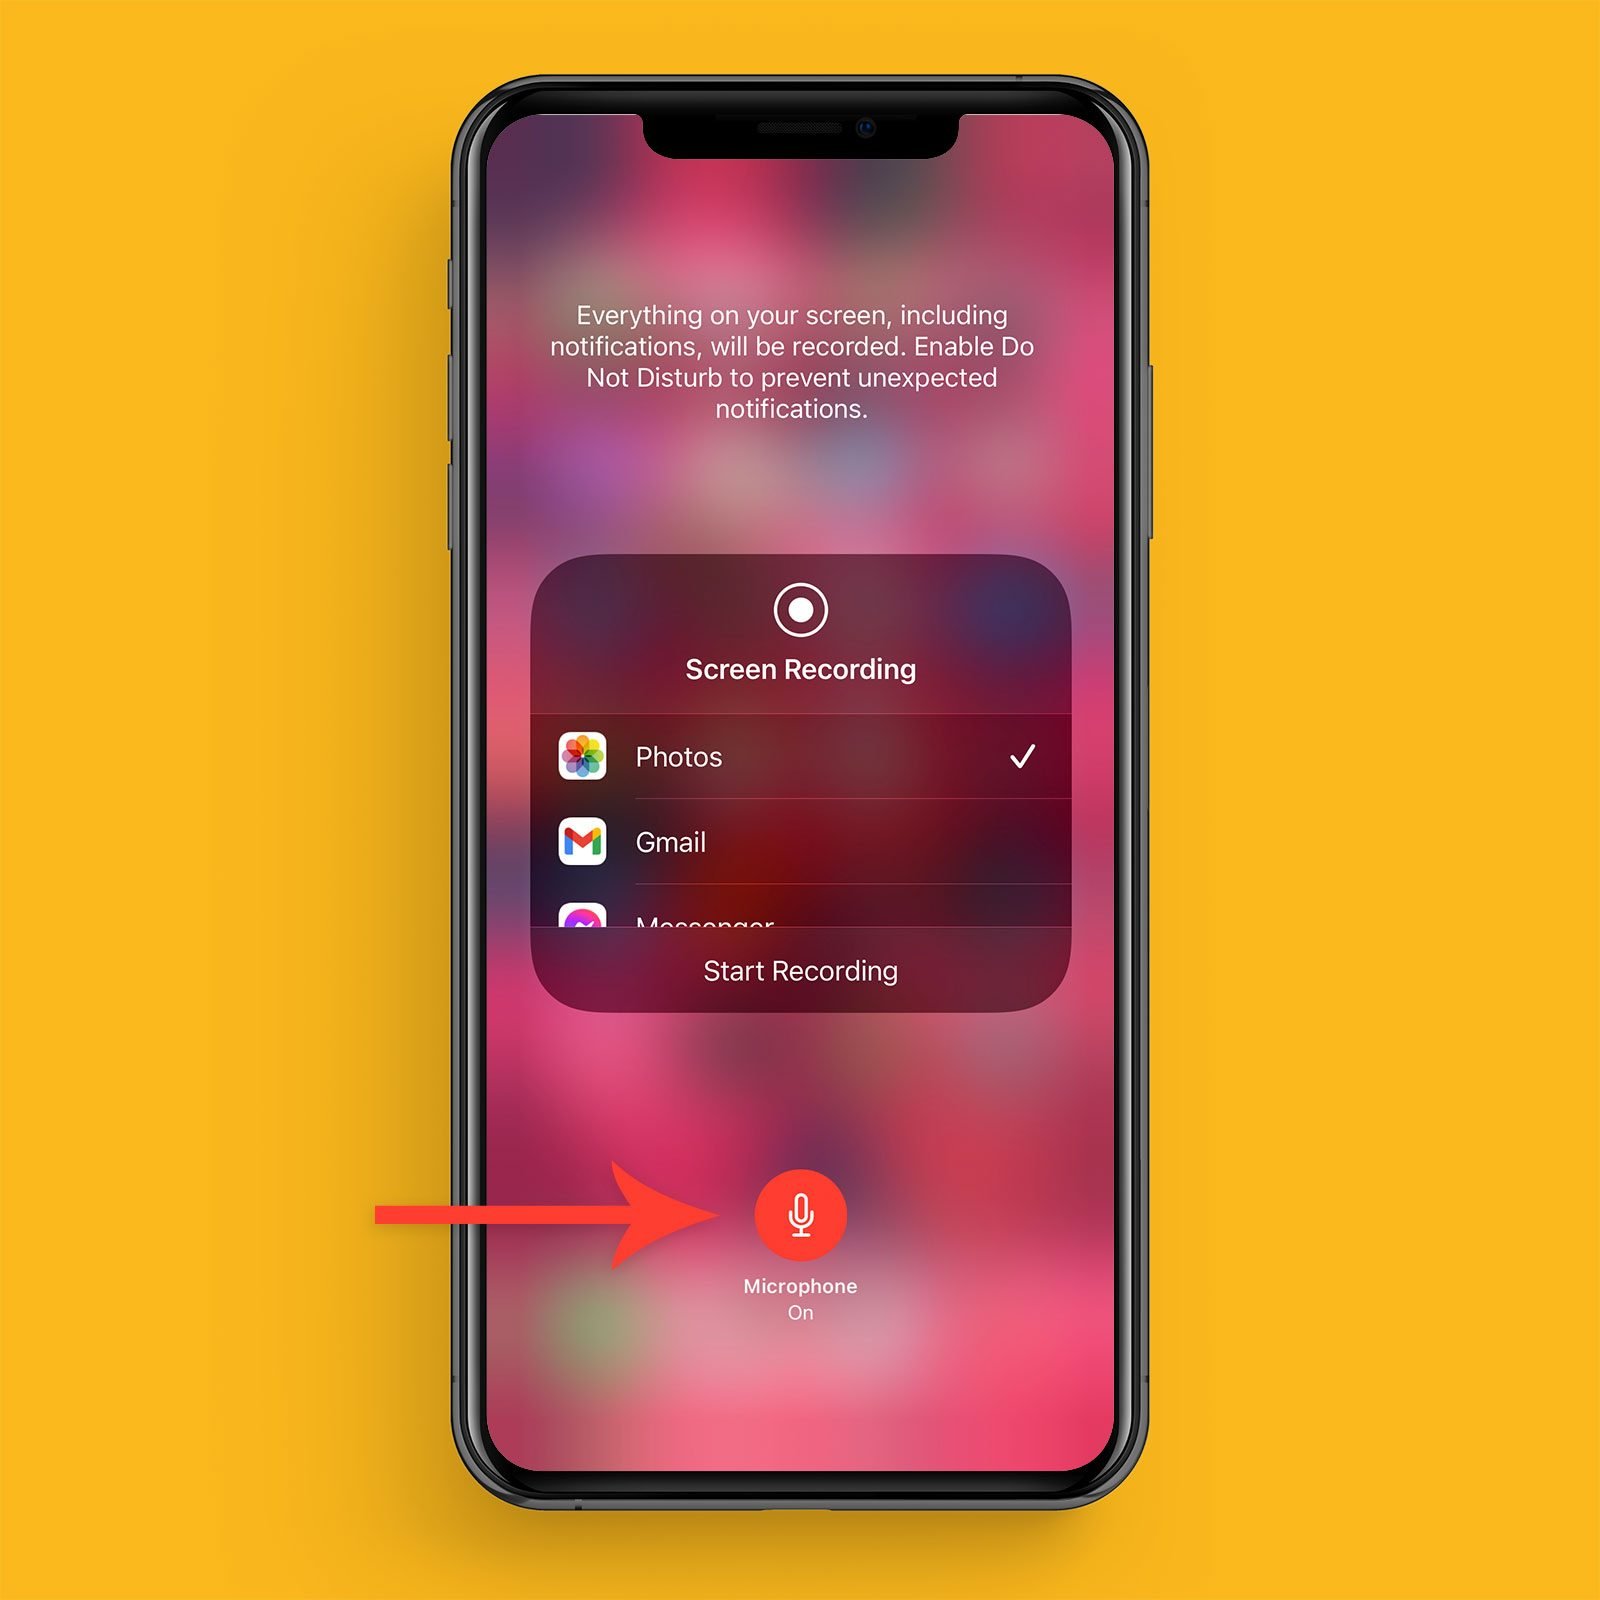 How to screen record with audio on an iPhone